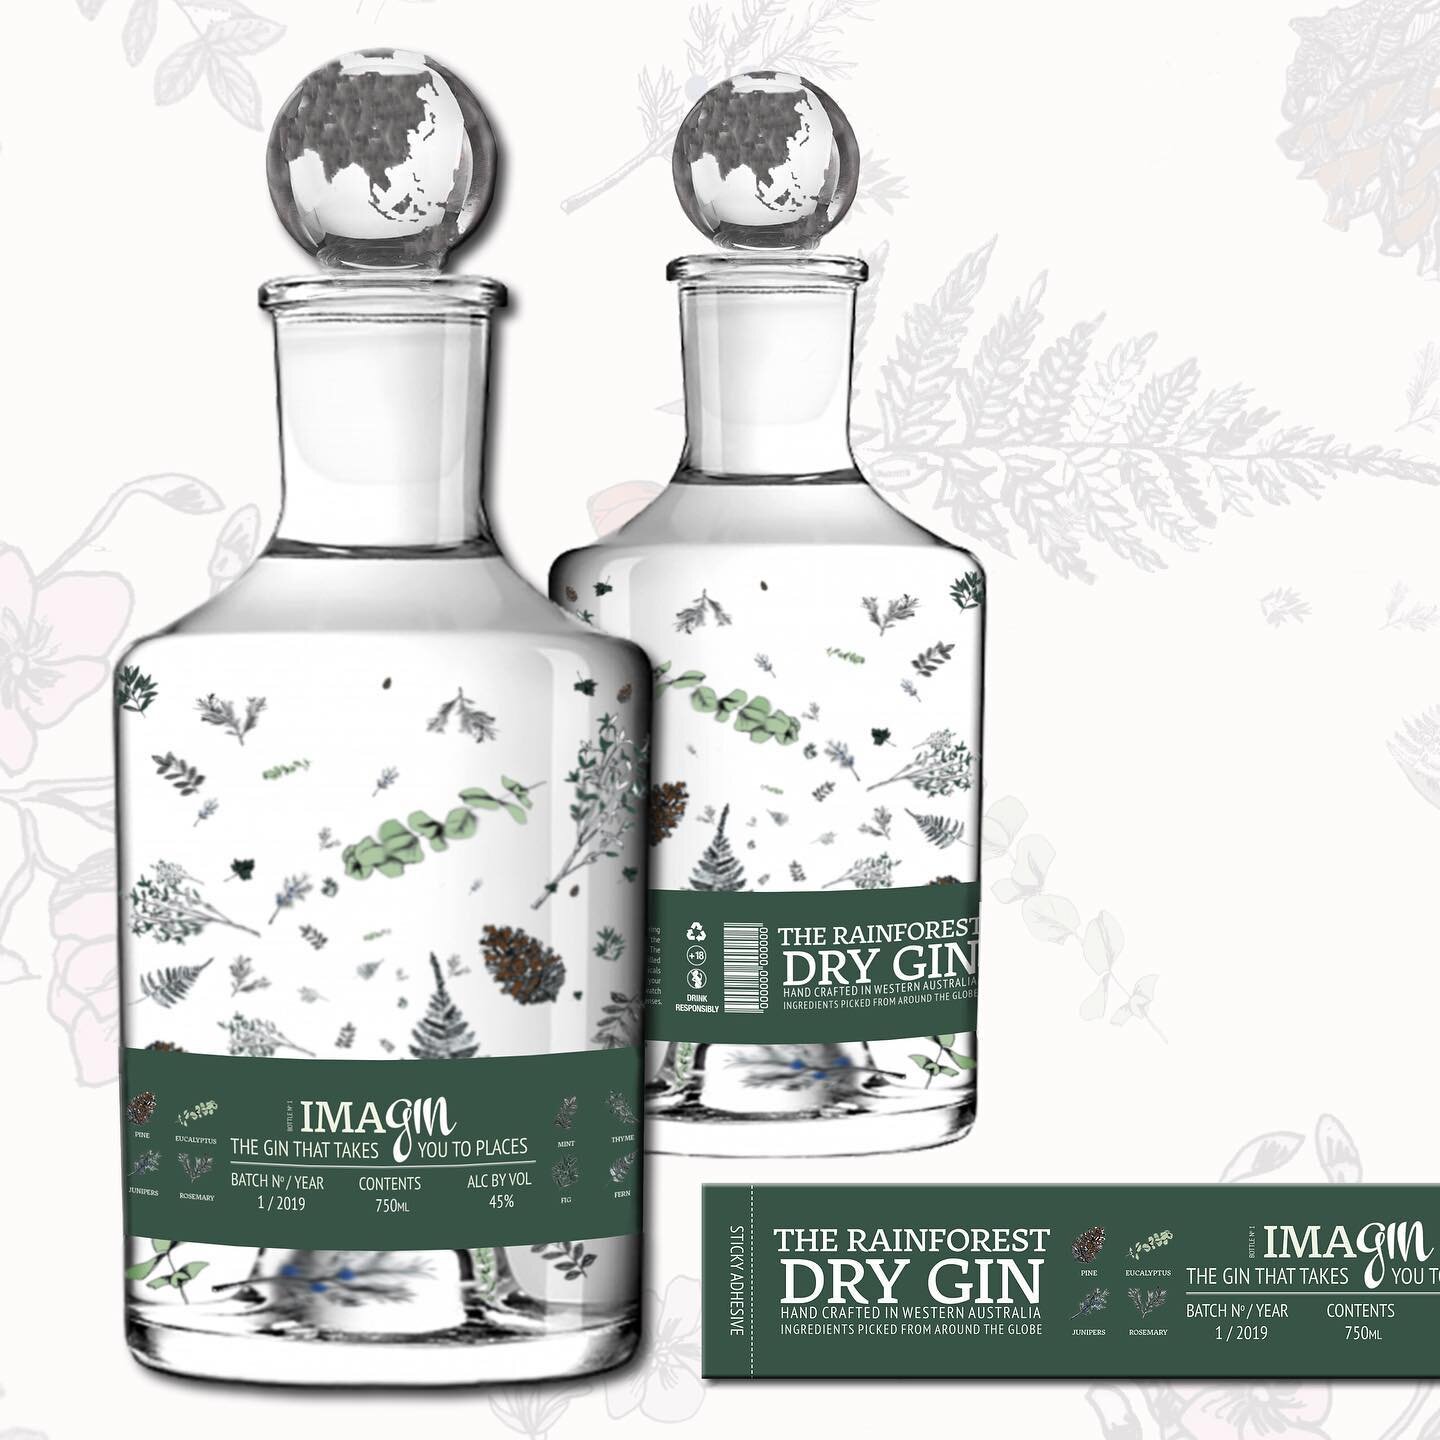 ImaGin. 
The Gin that takes you to places! 🥃🌍 Featuring The RainForest Dry Gin that is crafted and distilled from hand-picked botanicals found in deep rainforest. 
Take a whiff, a sip, and close your eyes... as the rainforest atmosphere unfold befo